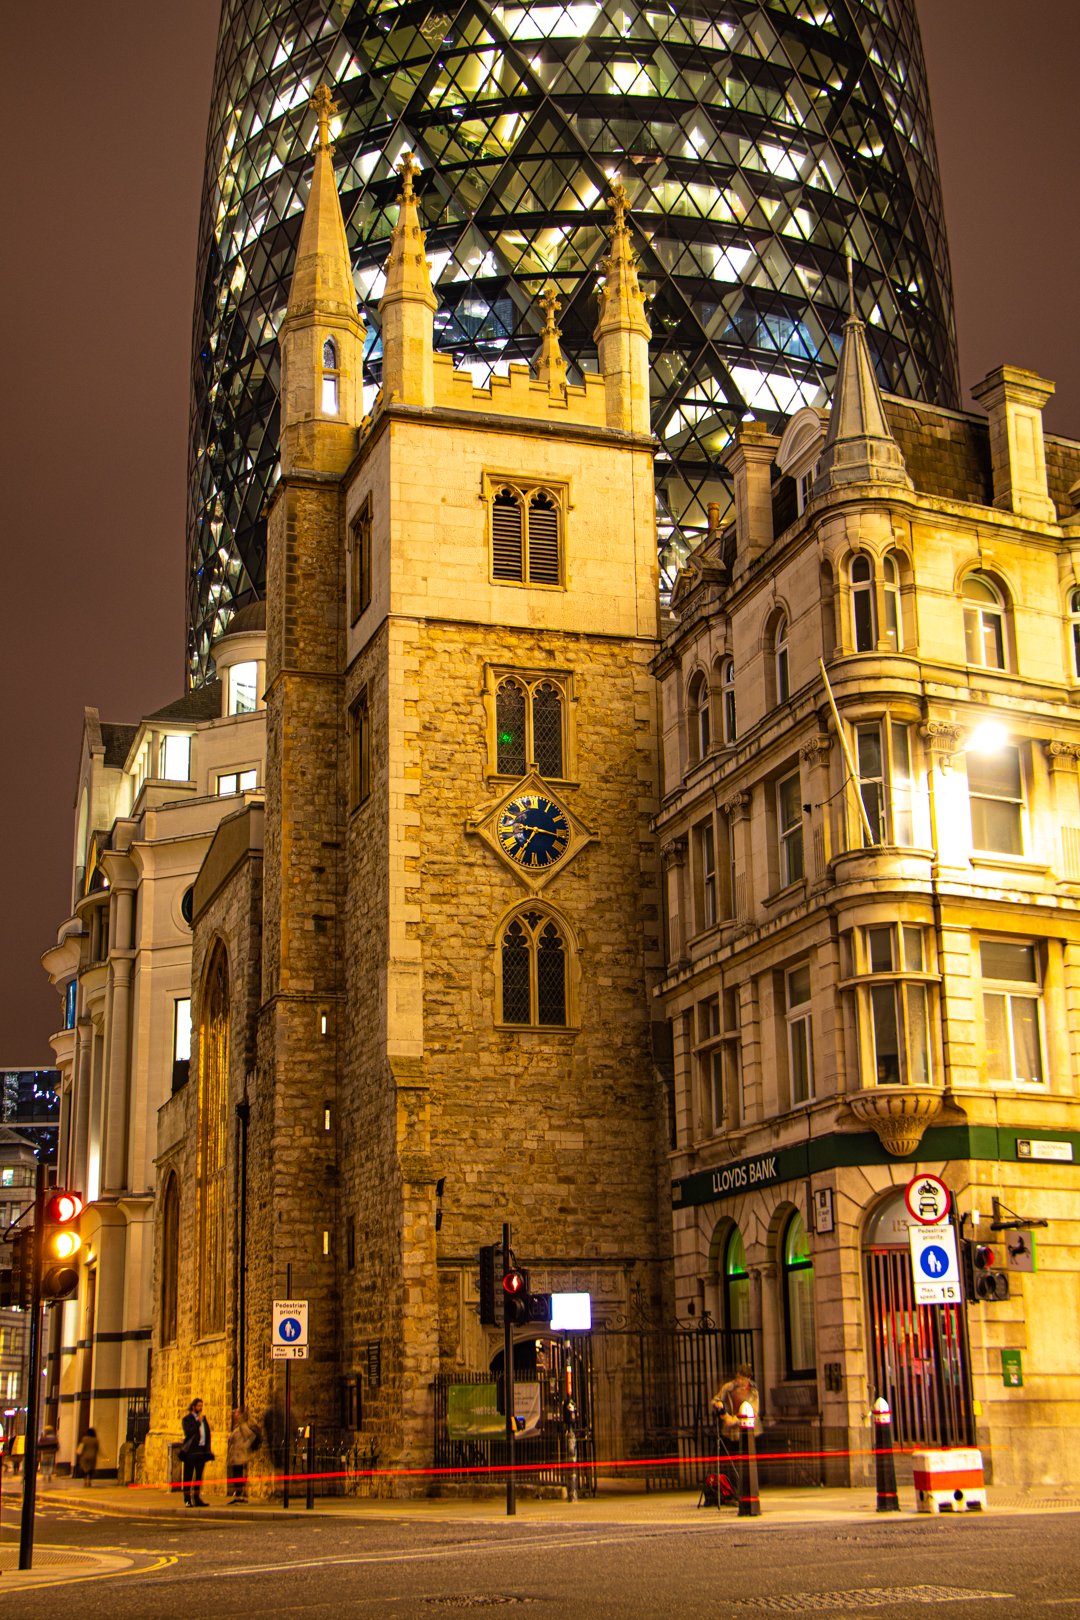 15th Century St Andrew Undershaft Church in St Mary Axe survived the Fire of London and the Blitz, now swamped by The Gherkin at 30 St Mary Axe.jpg